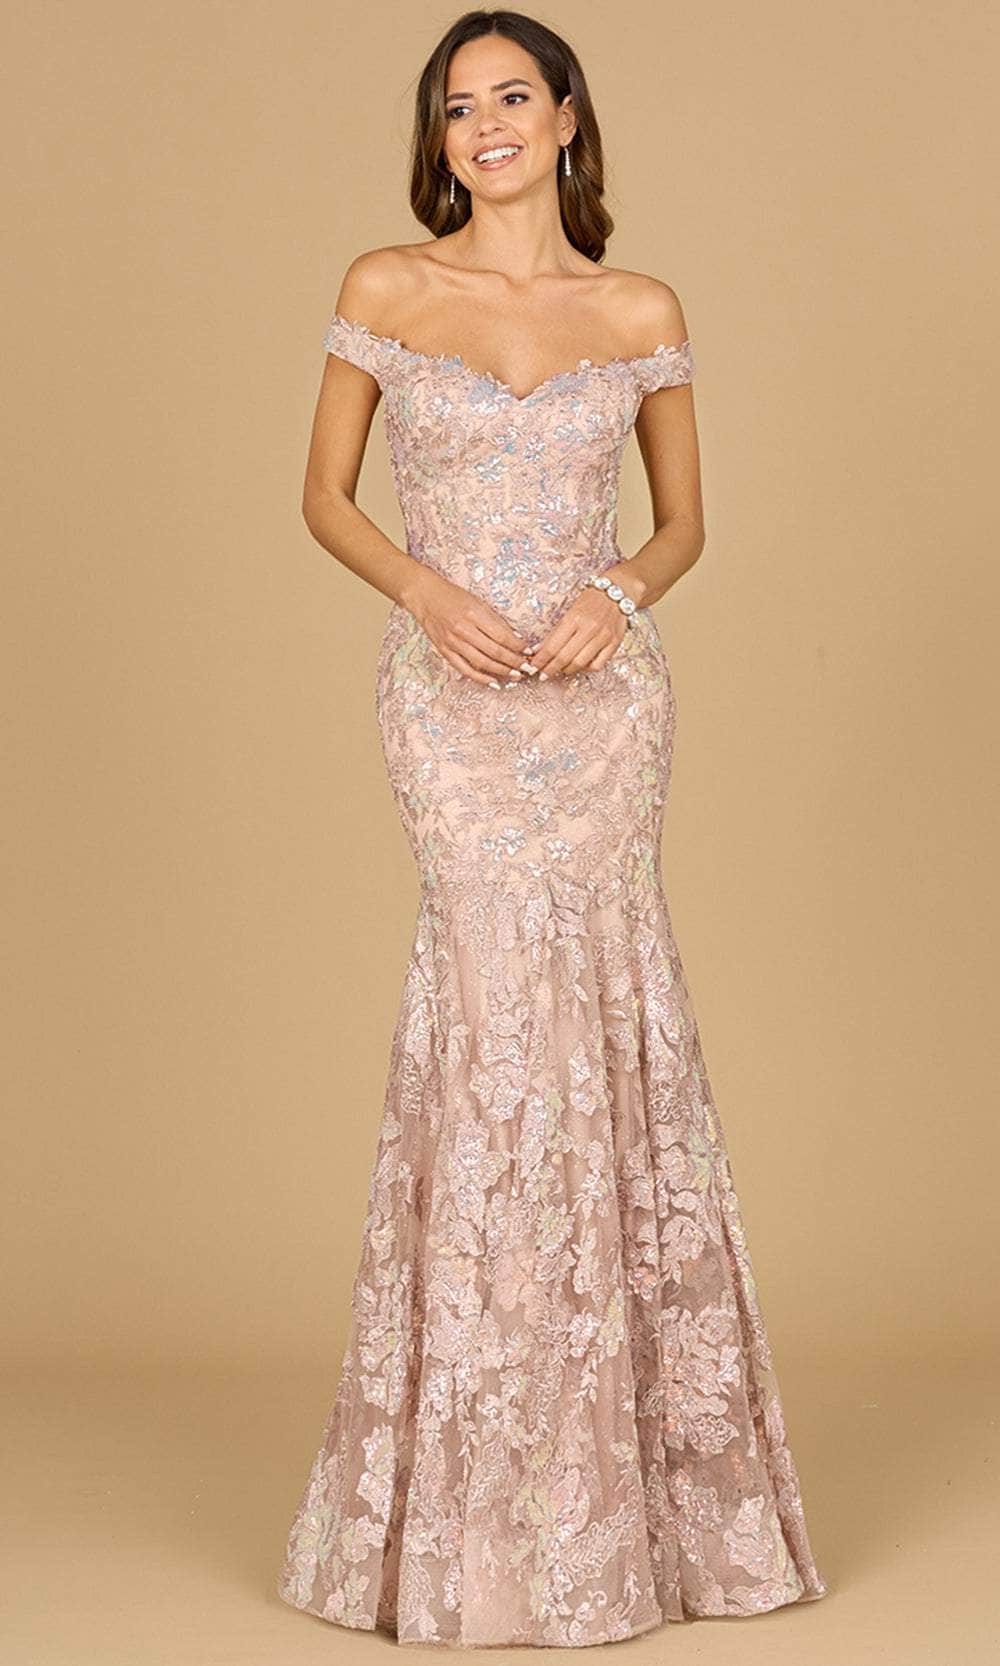 Image of Lara Dresses 29136 - Floral Lace Mermaid Evening Gown